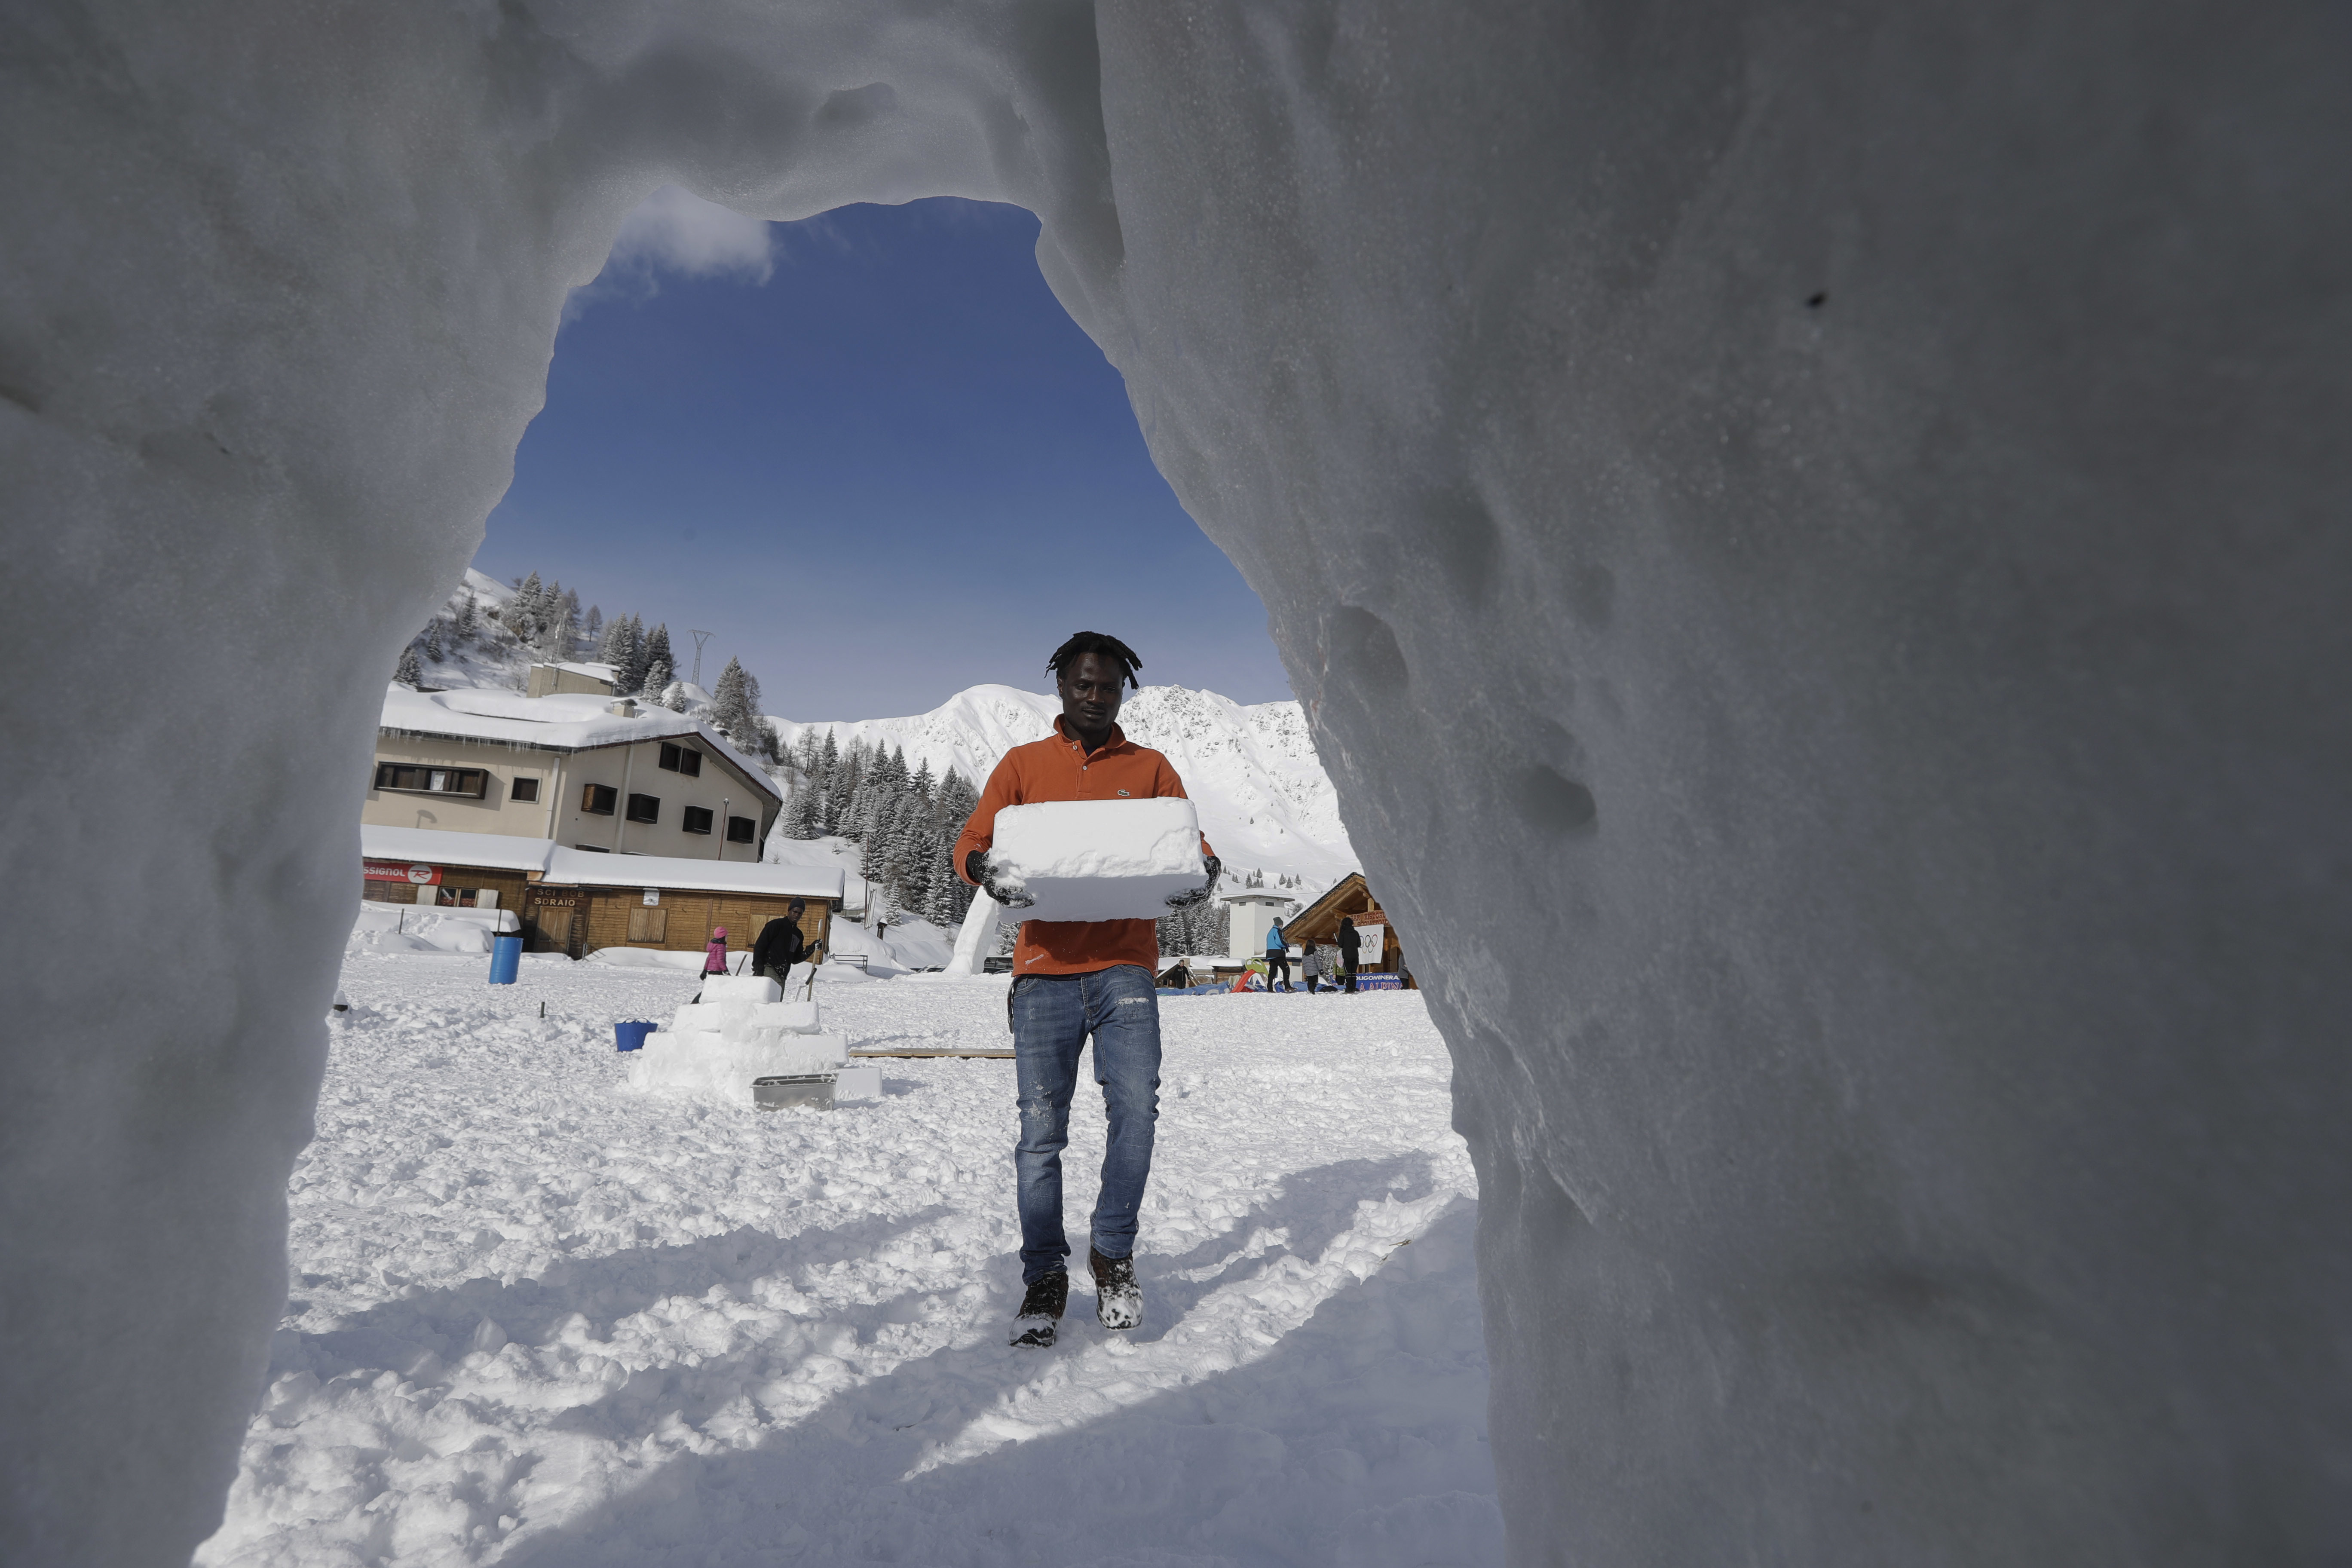 Omar Kanteh, of Gambia, carries a block of ice as he builds an igloo (Luca Bruno/AP)